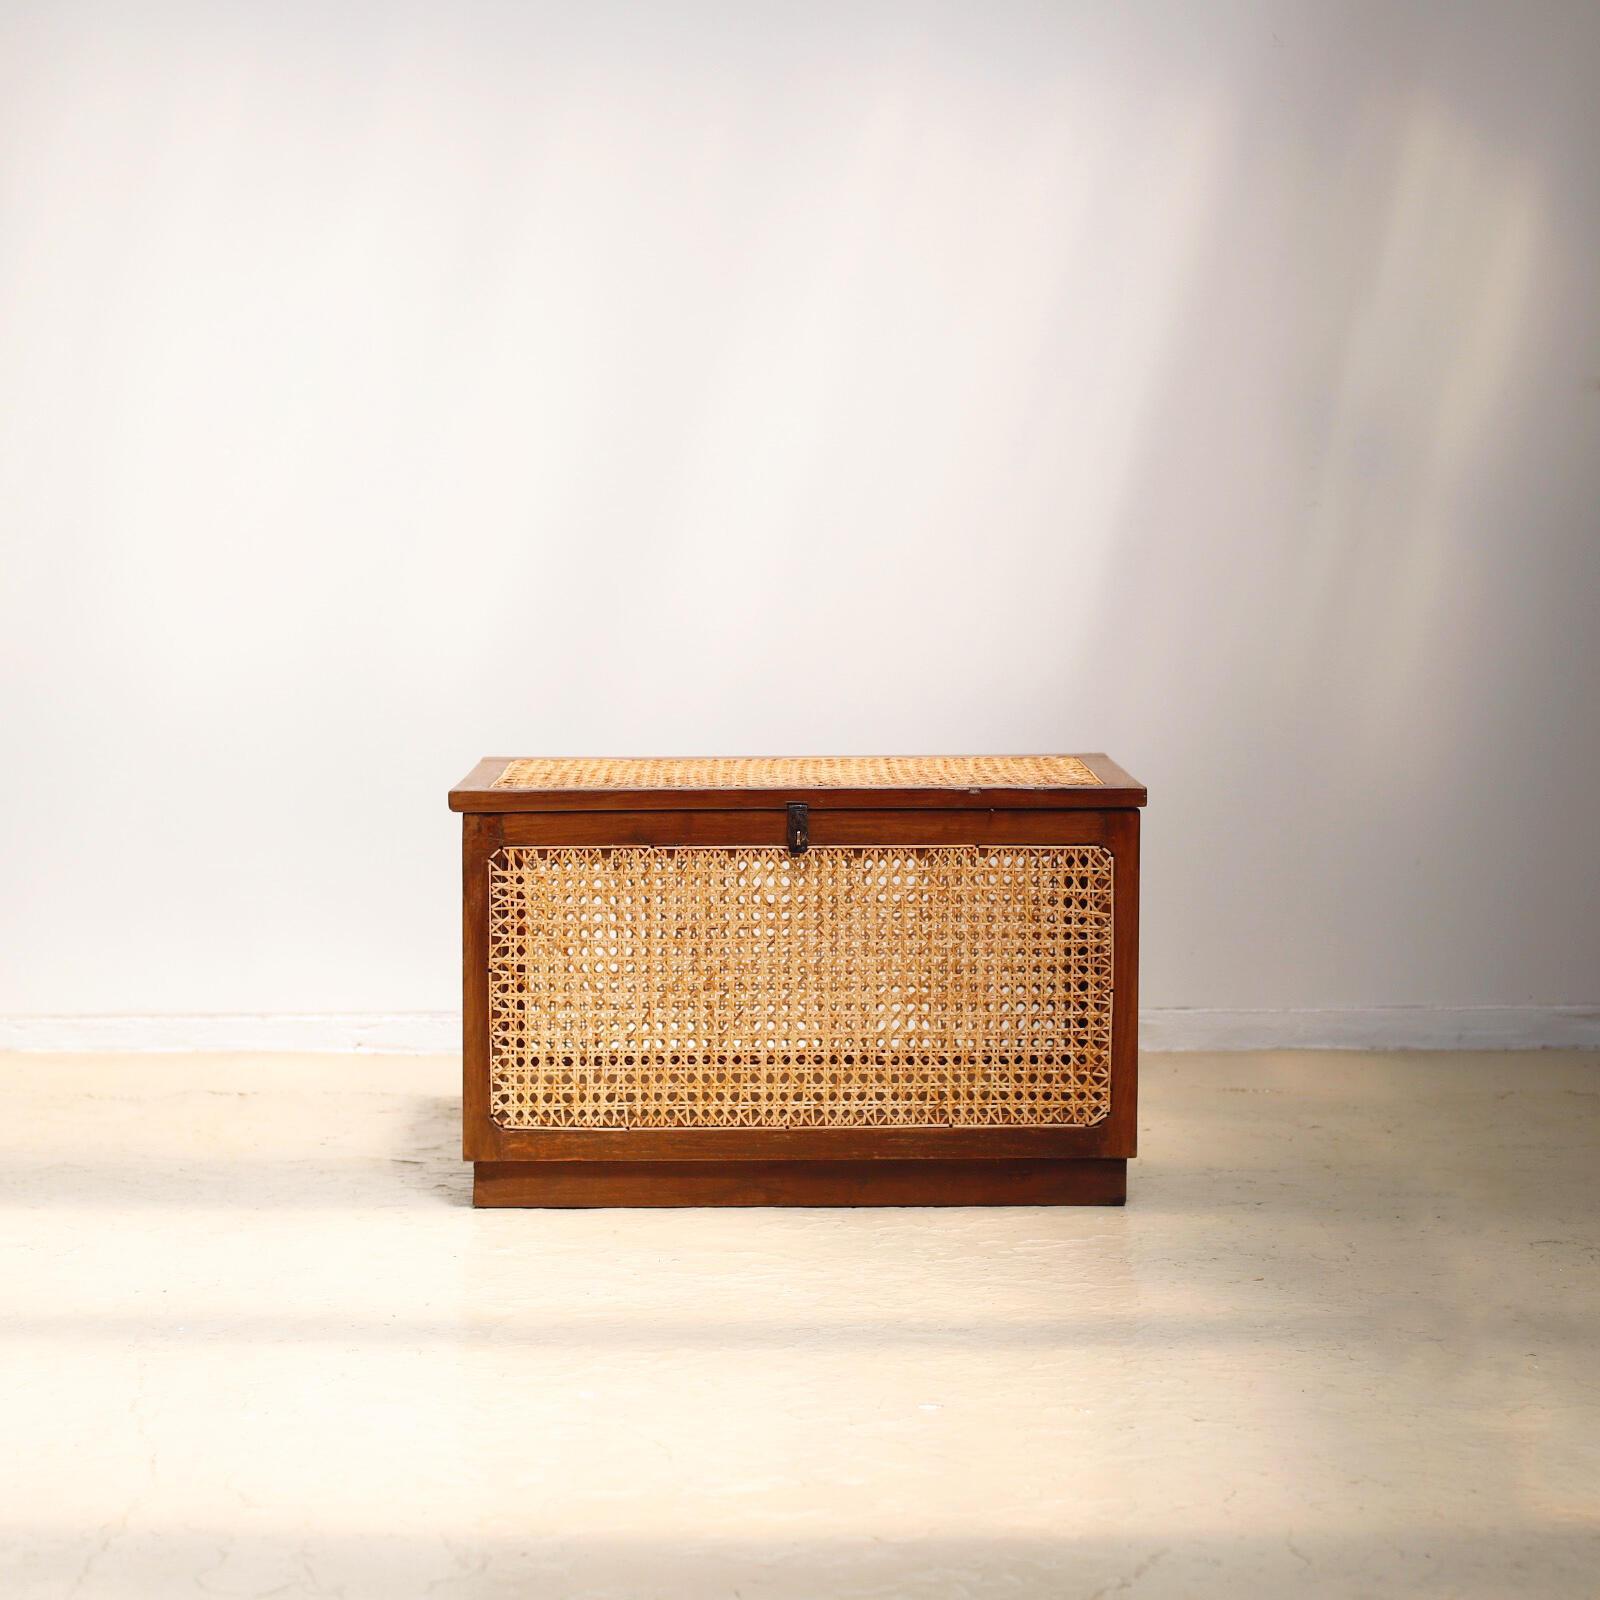 Mid-20th Century Pierre Jeanneret Linen Chest from the M.L.A. Flats Building, Chandigarh